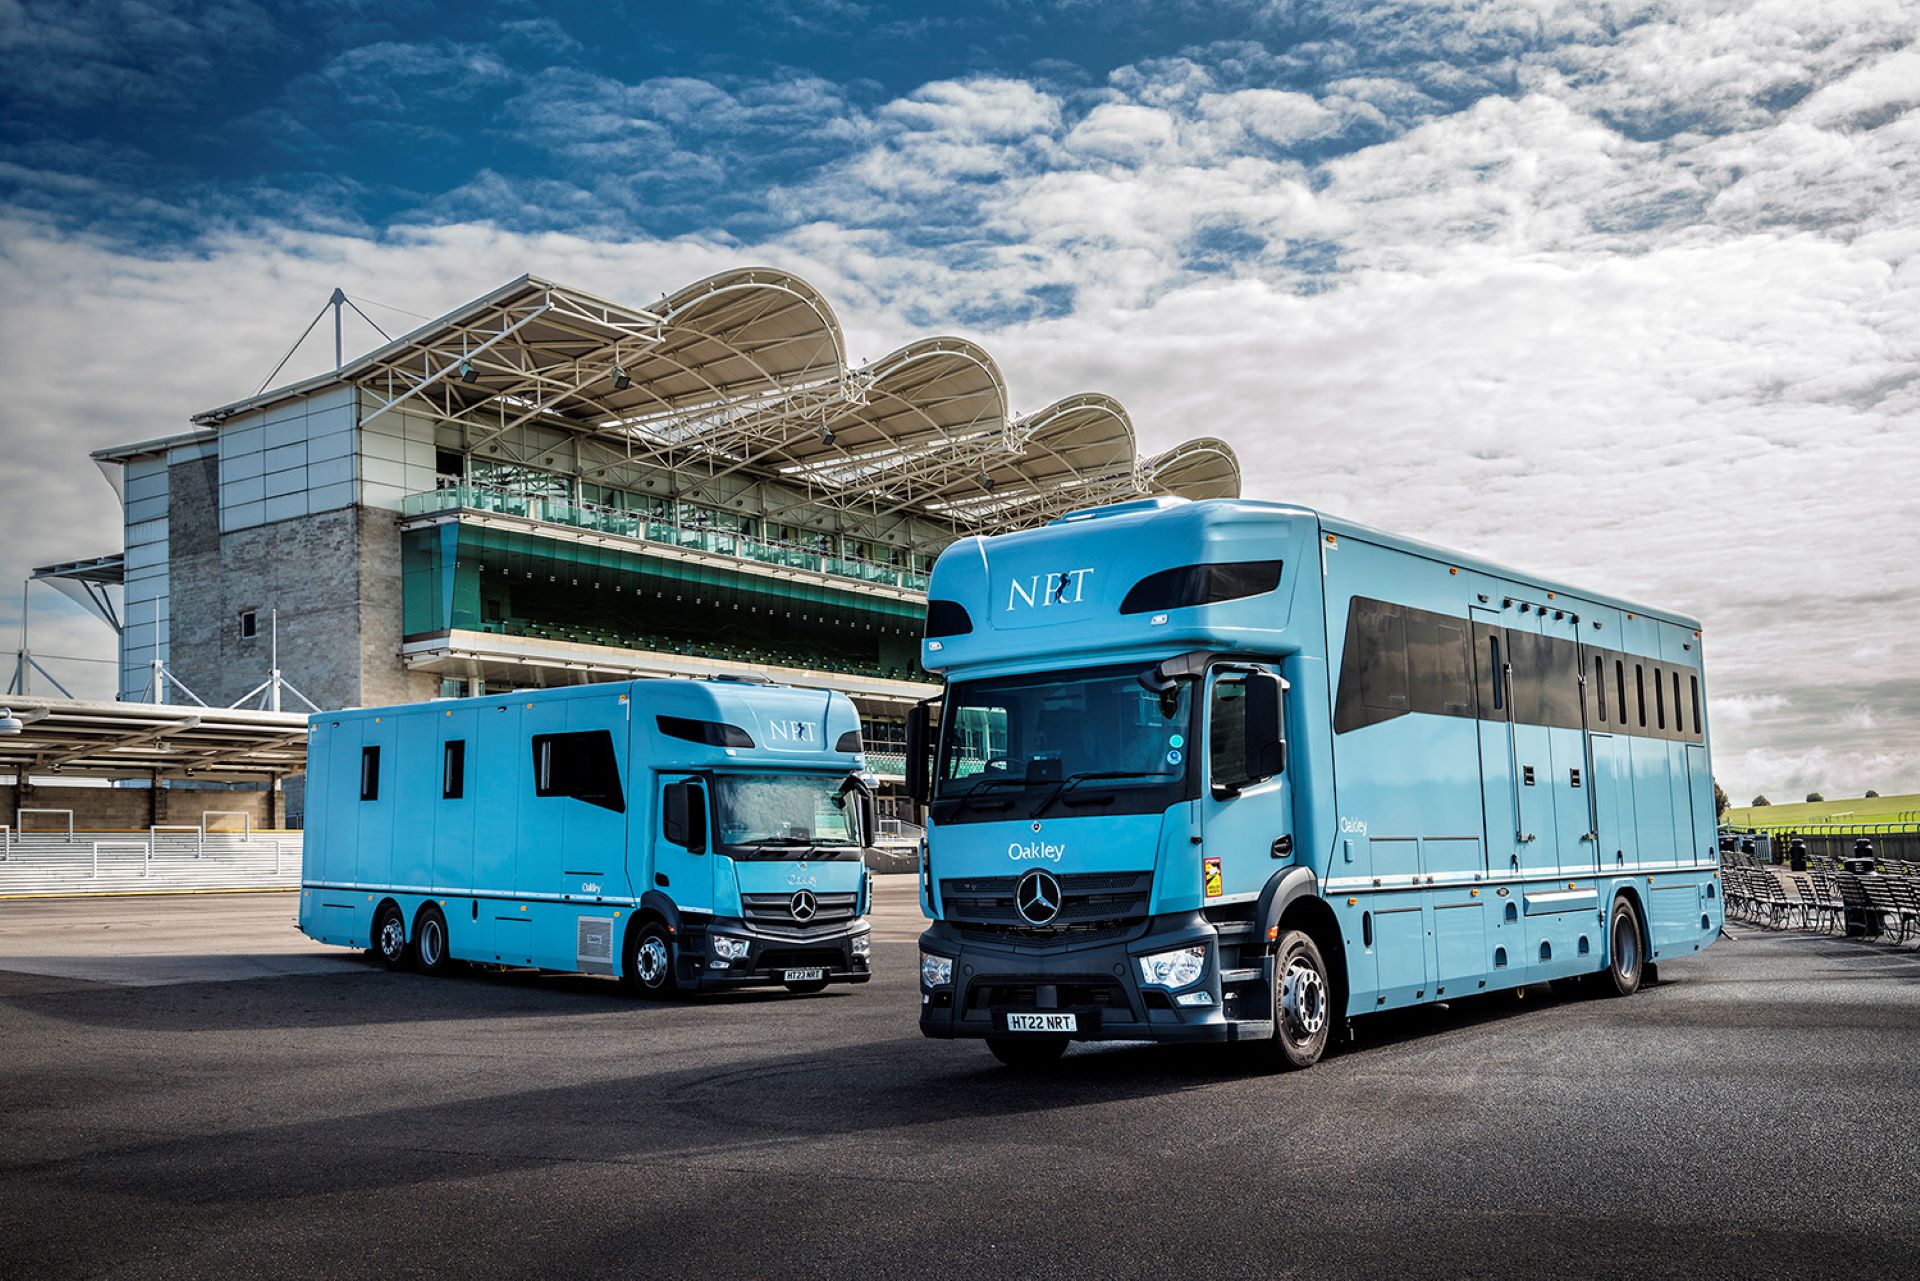 NRT races ahead of the field with new Actros horse transporters